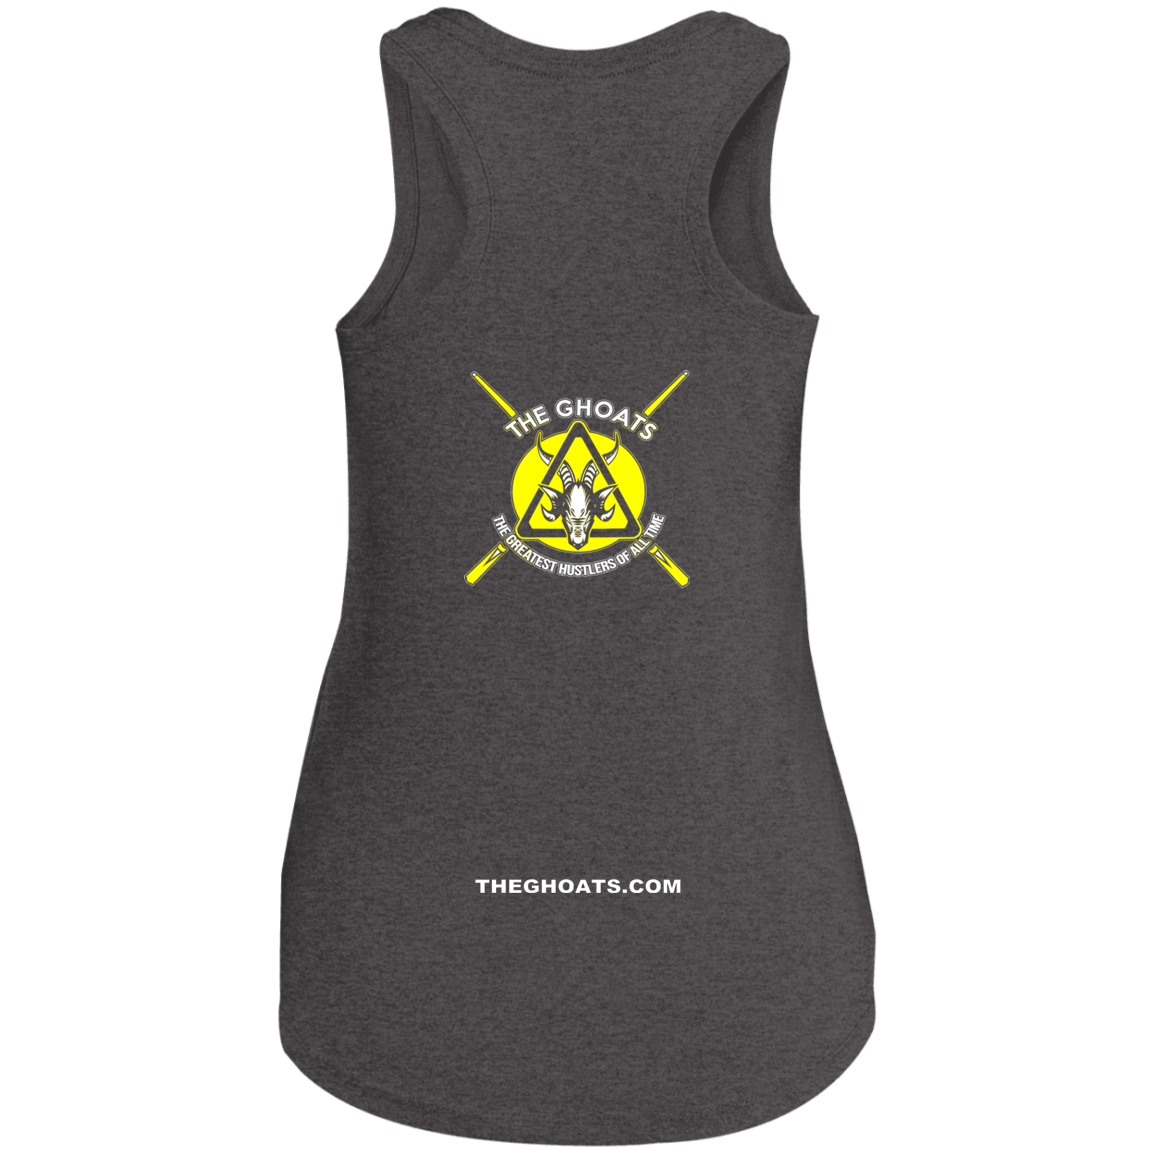 The GHOATS Custom Design #1. Active Shooter. Ladies' Perfect Tri Racerback Tank